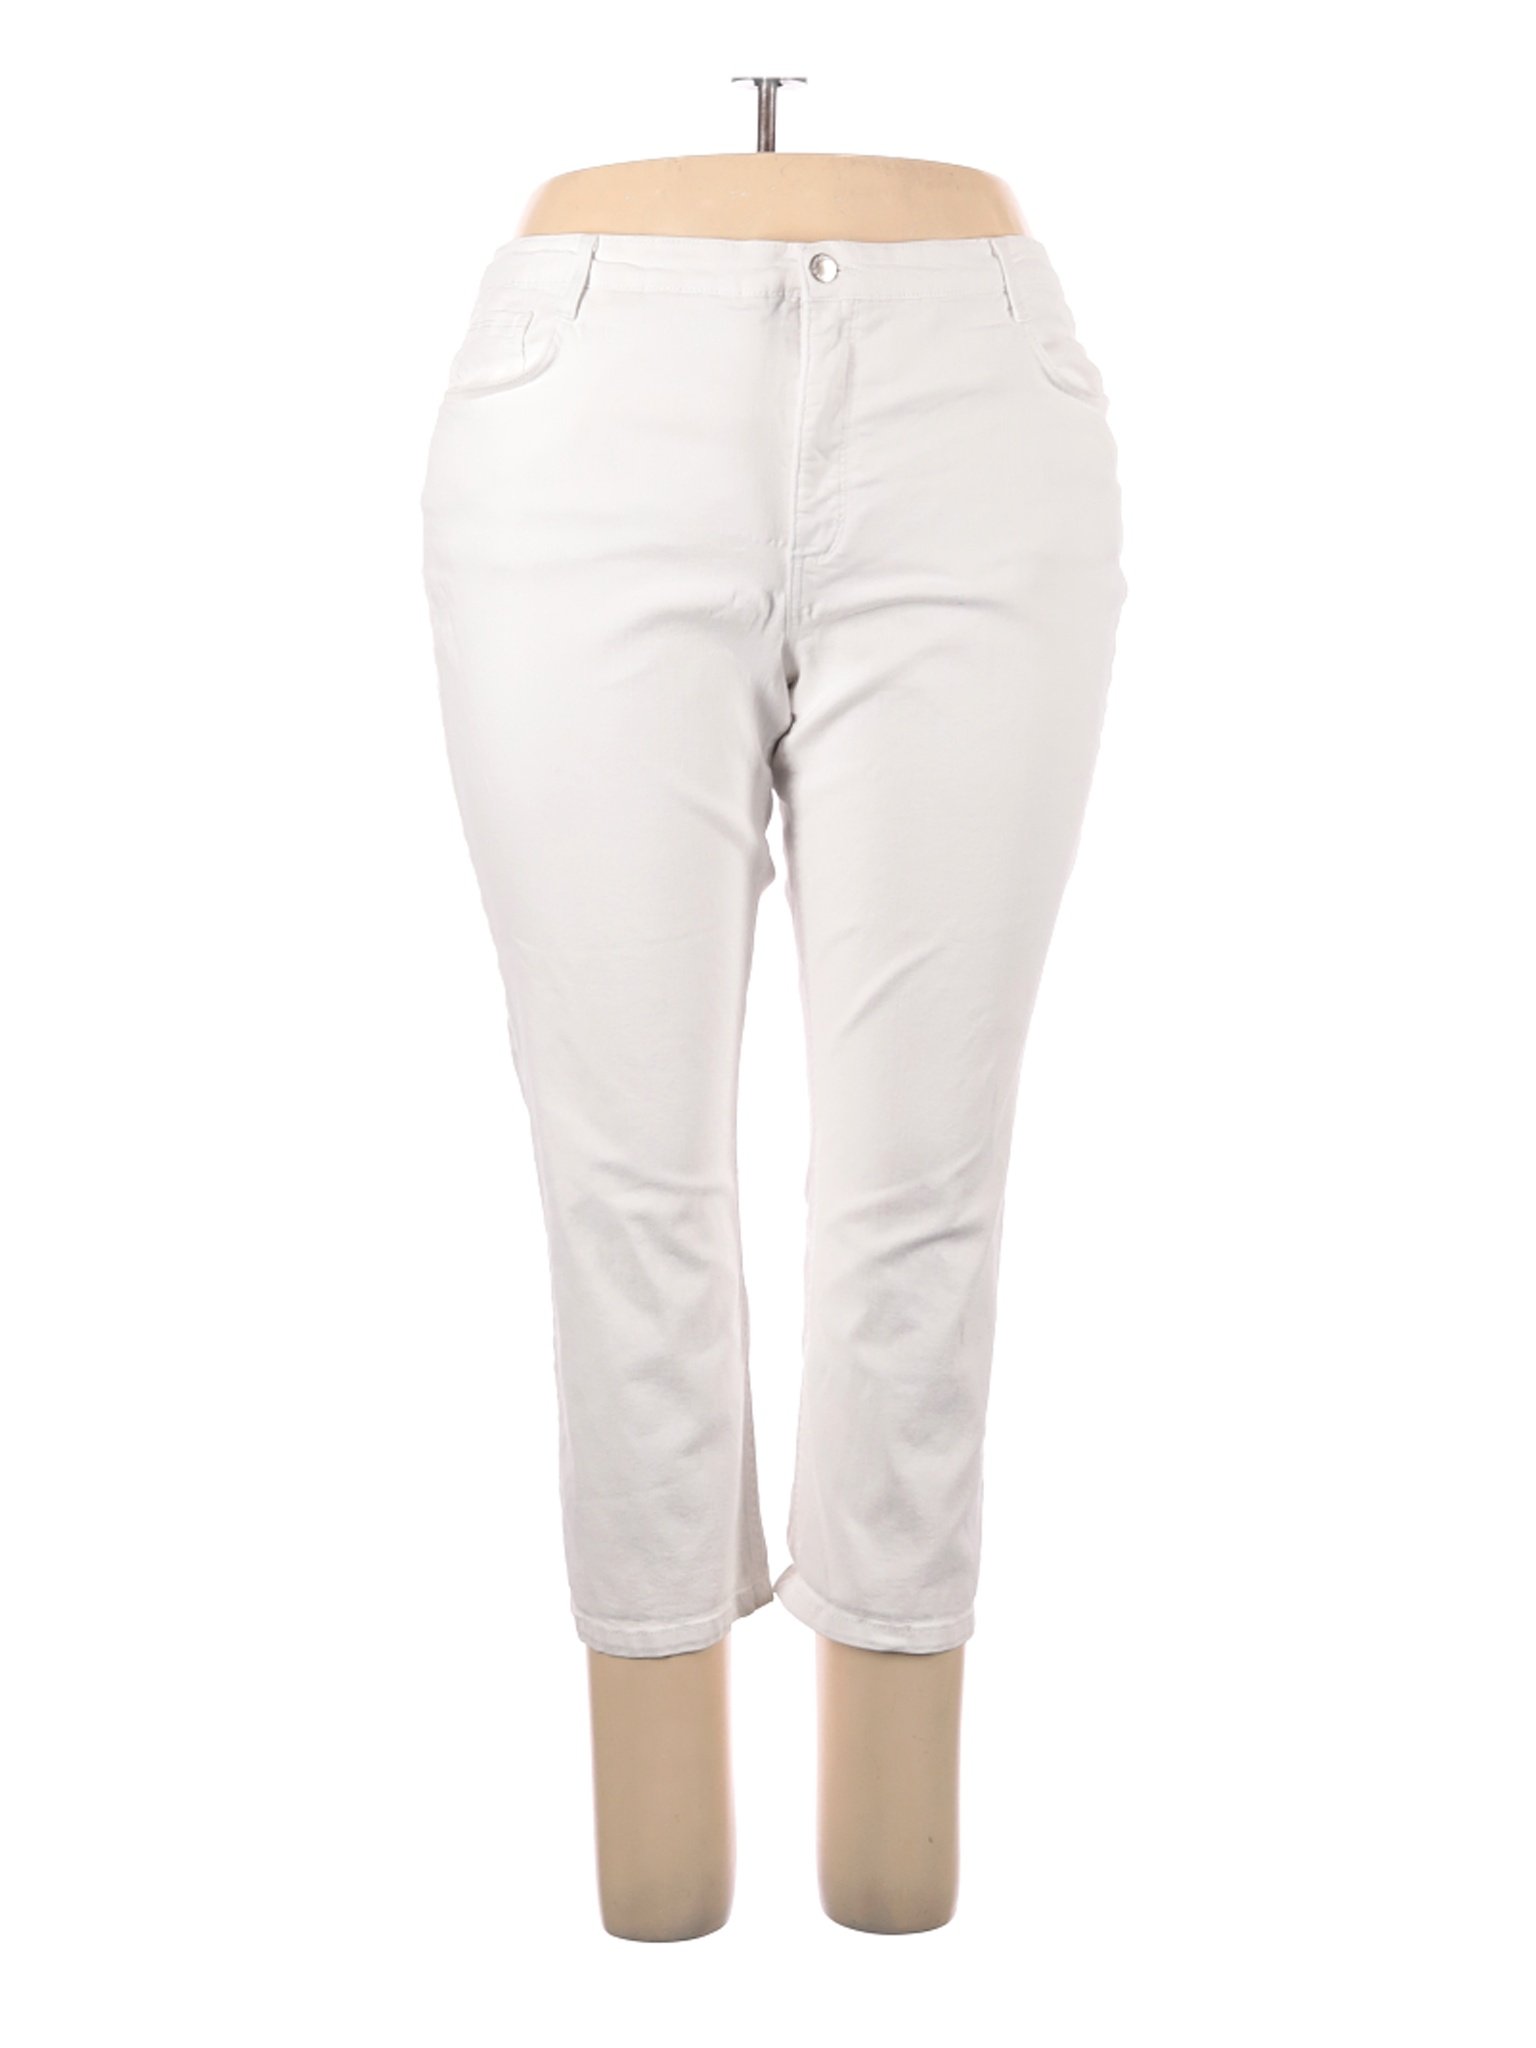 white jeans size 22